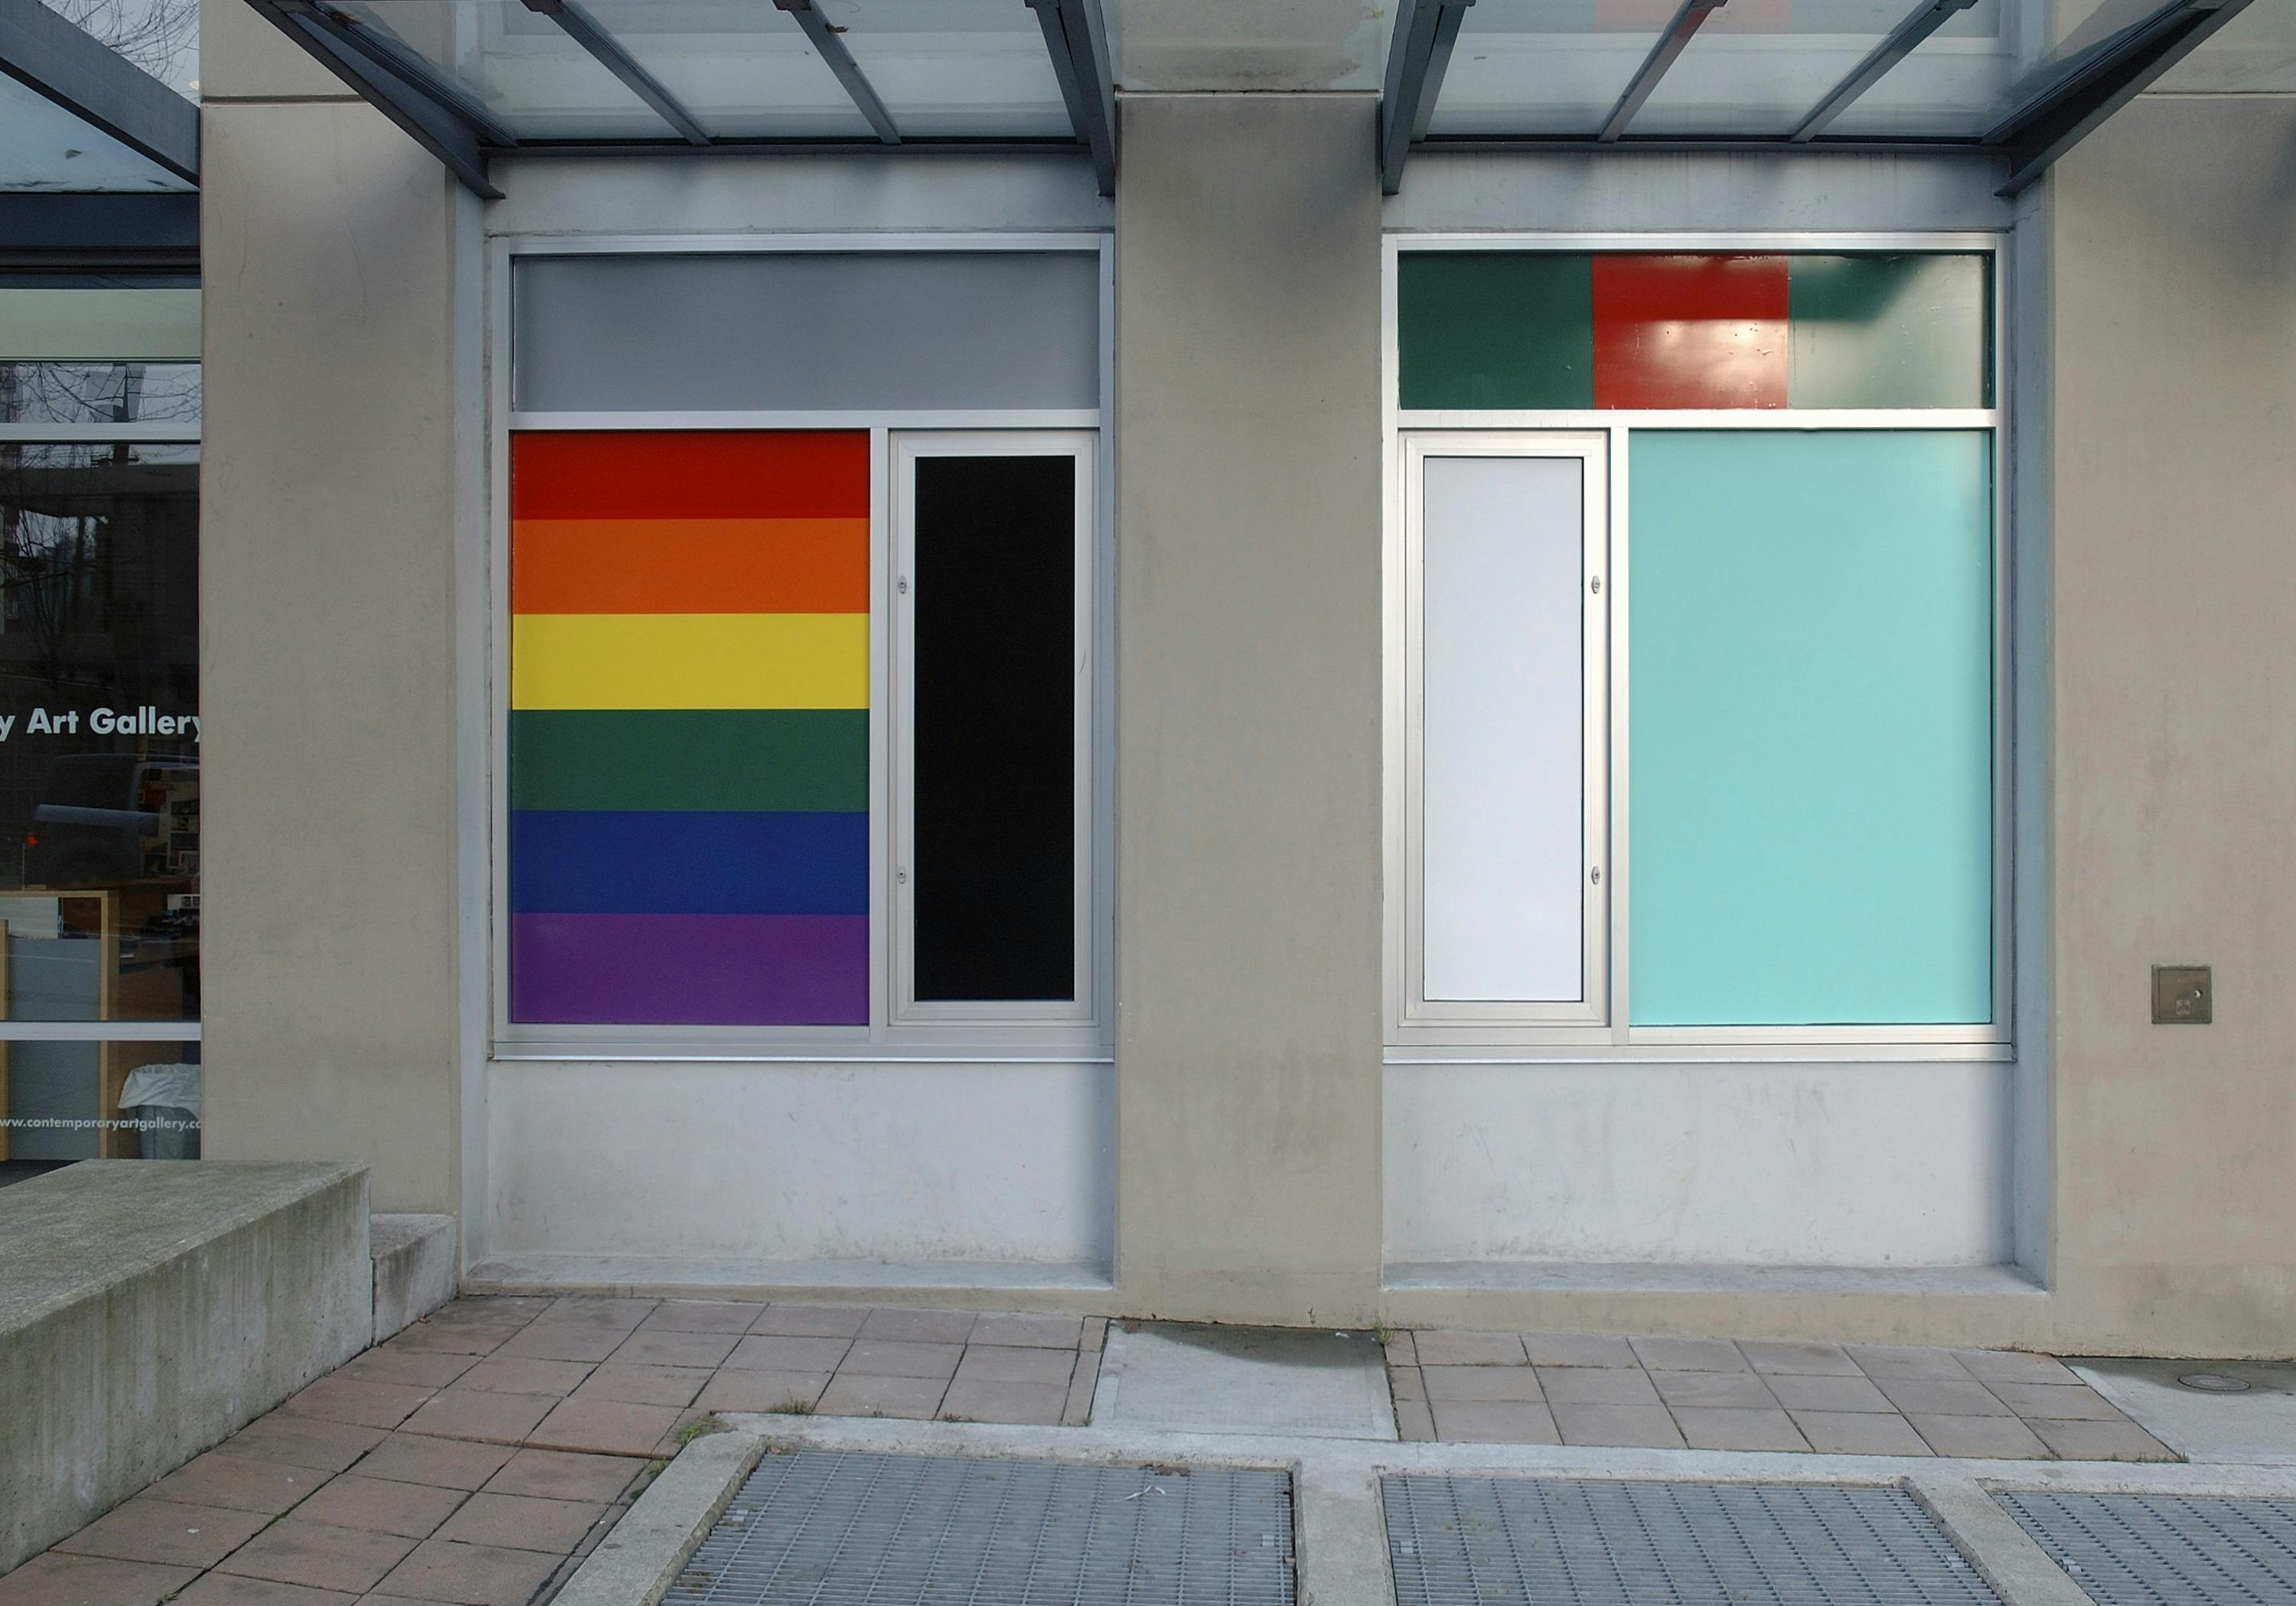 Install image of the first floor windows of CAG facing Nelson Street. Vinyl sheets cover entire windows. One window is covered with a seven-striped rainbow flag pattern. 